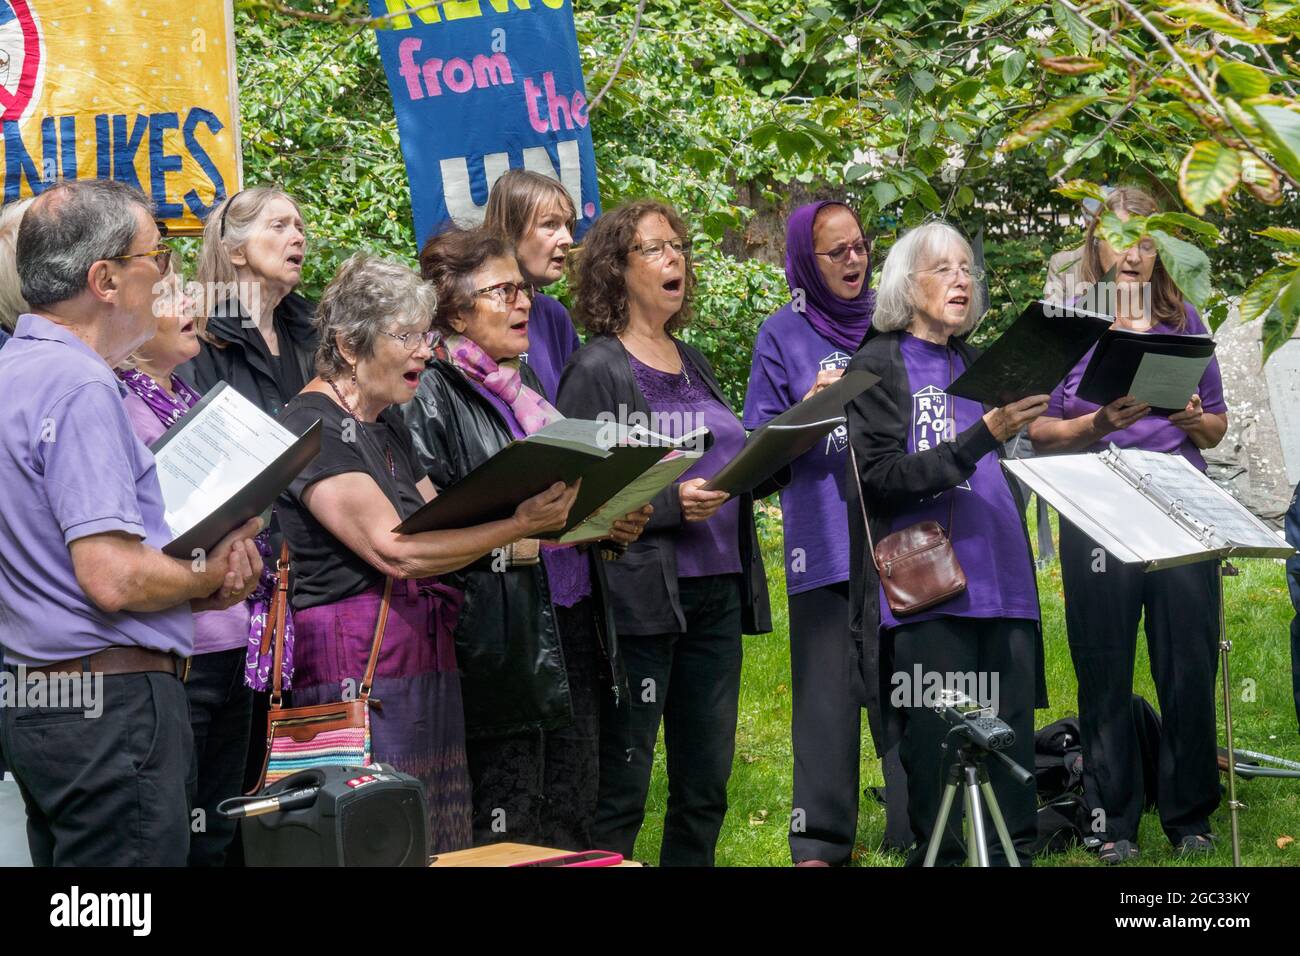 London, UK. 6th August 2021. Raised Voices sing a Japanese song about atomic weapons. 76 years after atomic bombs were dropped on Hiroshima and Nagaski, London CND met at the Hiroshima Cherry tree in Tavistock Square to remember the many killed and survivors who are still suffering the event, and to celebrate the UN treaty prohibiting nuclear weapons which came into force this January. They called on the government to end the UK's nuclear weapon programme. Peter Marshall/Alamy Live News Stock Photo